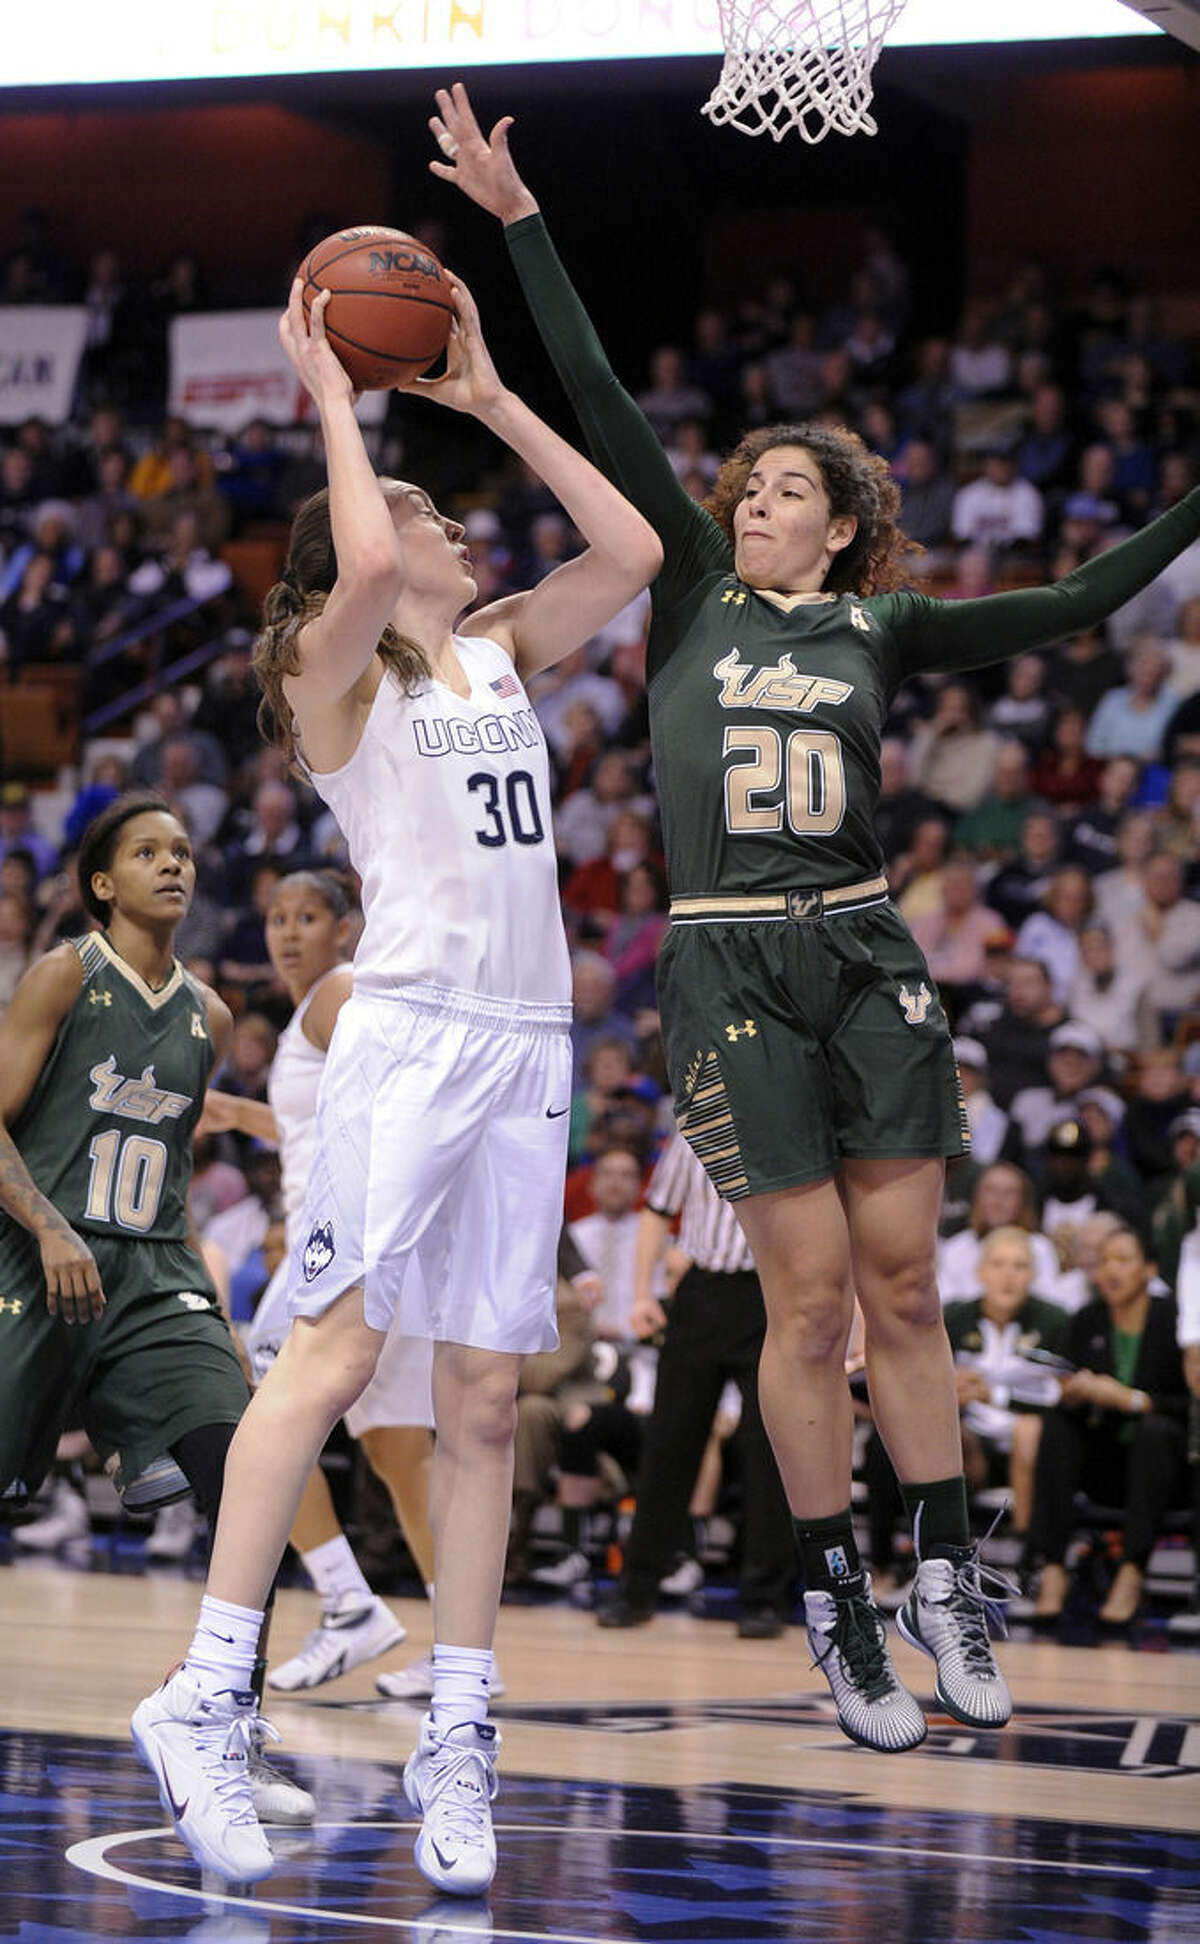 Connecticut's Breanna Stewart (30) is guarded by USF's Laura Ferreira (20) during the first half of an NCAA college basketball game in the finals of the American Athletic Conference tournament in Uncasville, Conn., on Monday, March 9, 2015. (AP Photo/Fred Beckham)